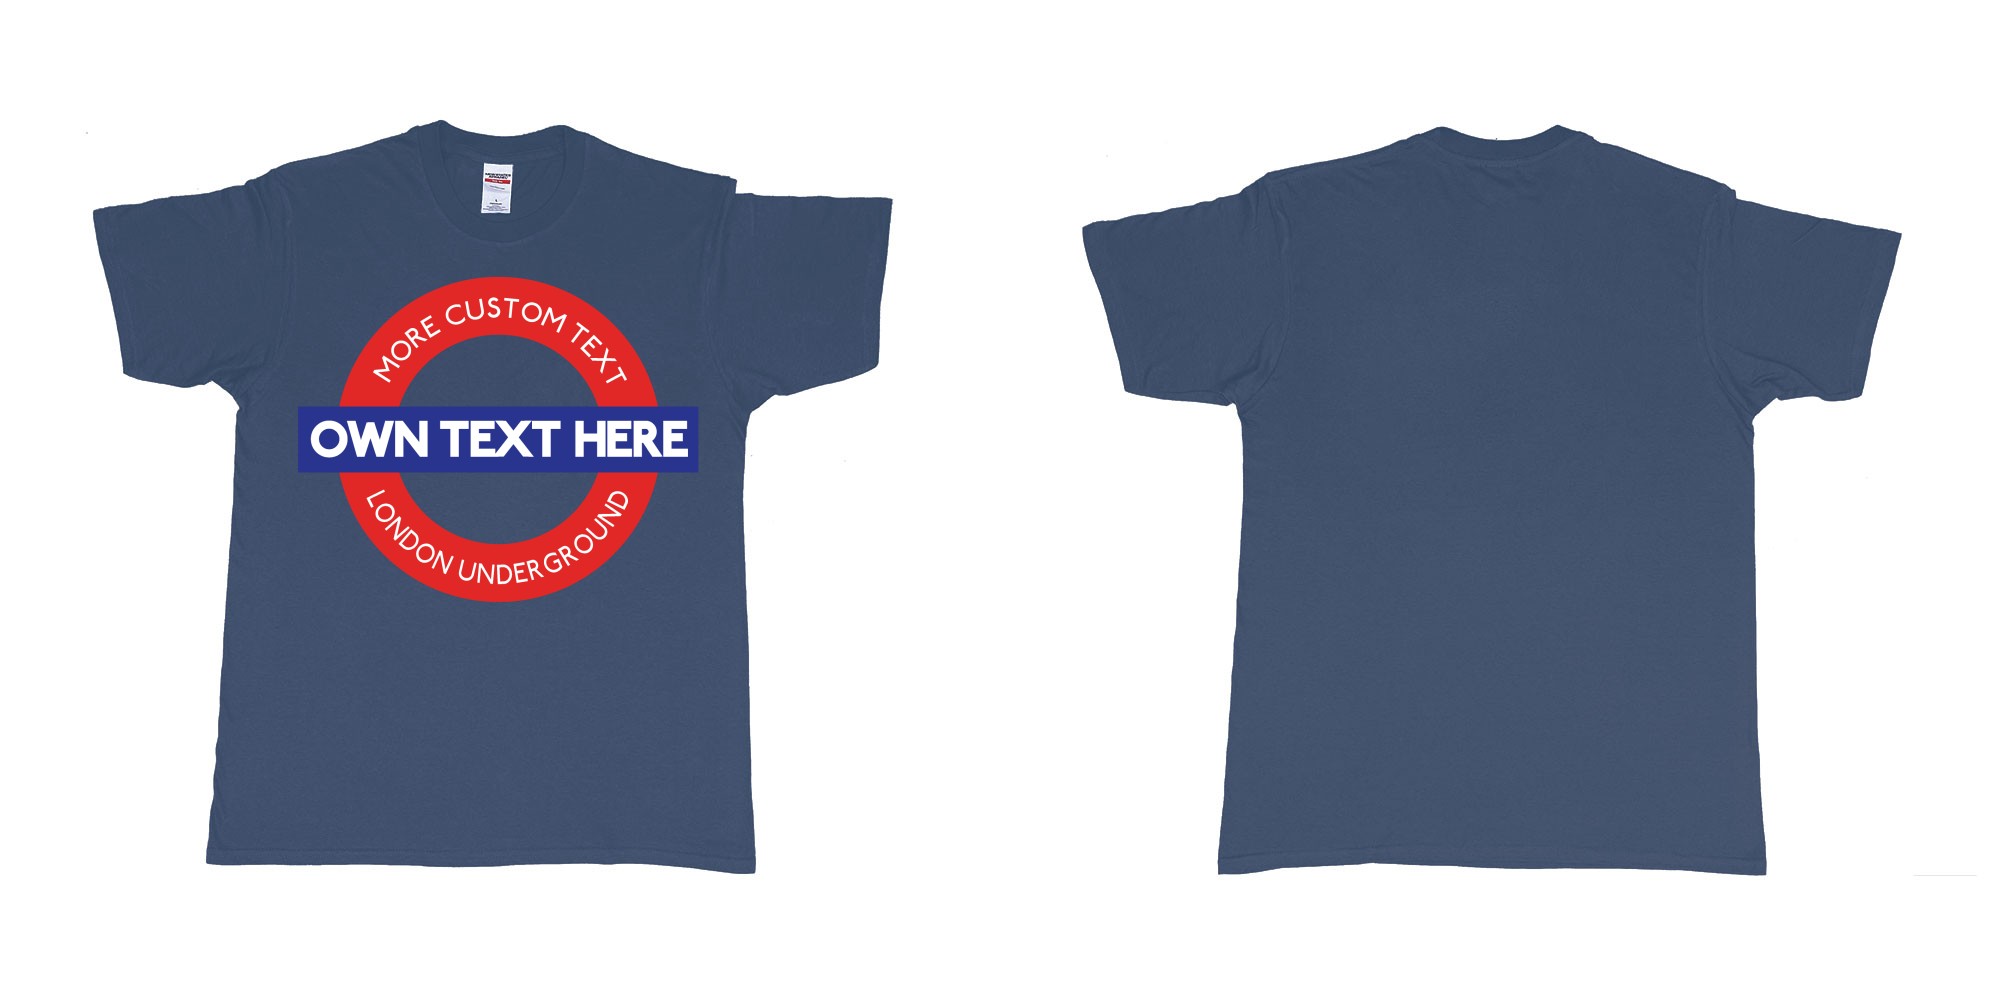 Custom tshirt design london underground logo custom design in fabric color navy choice your own text made in Bali by The Pirate Way